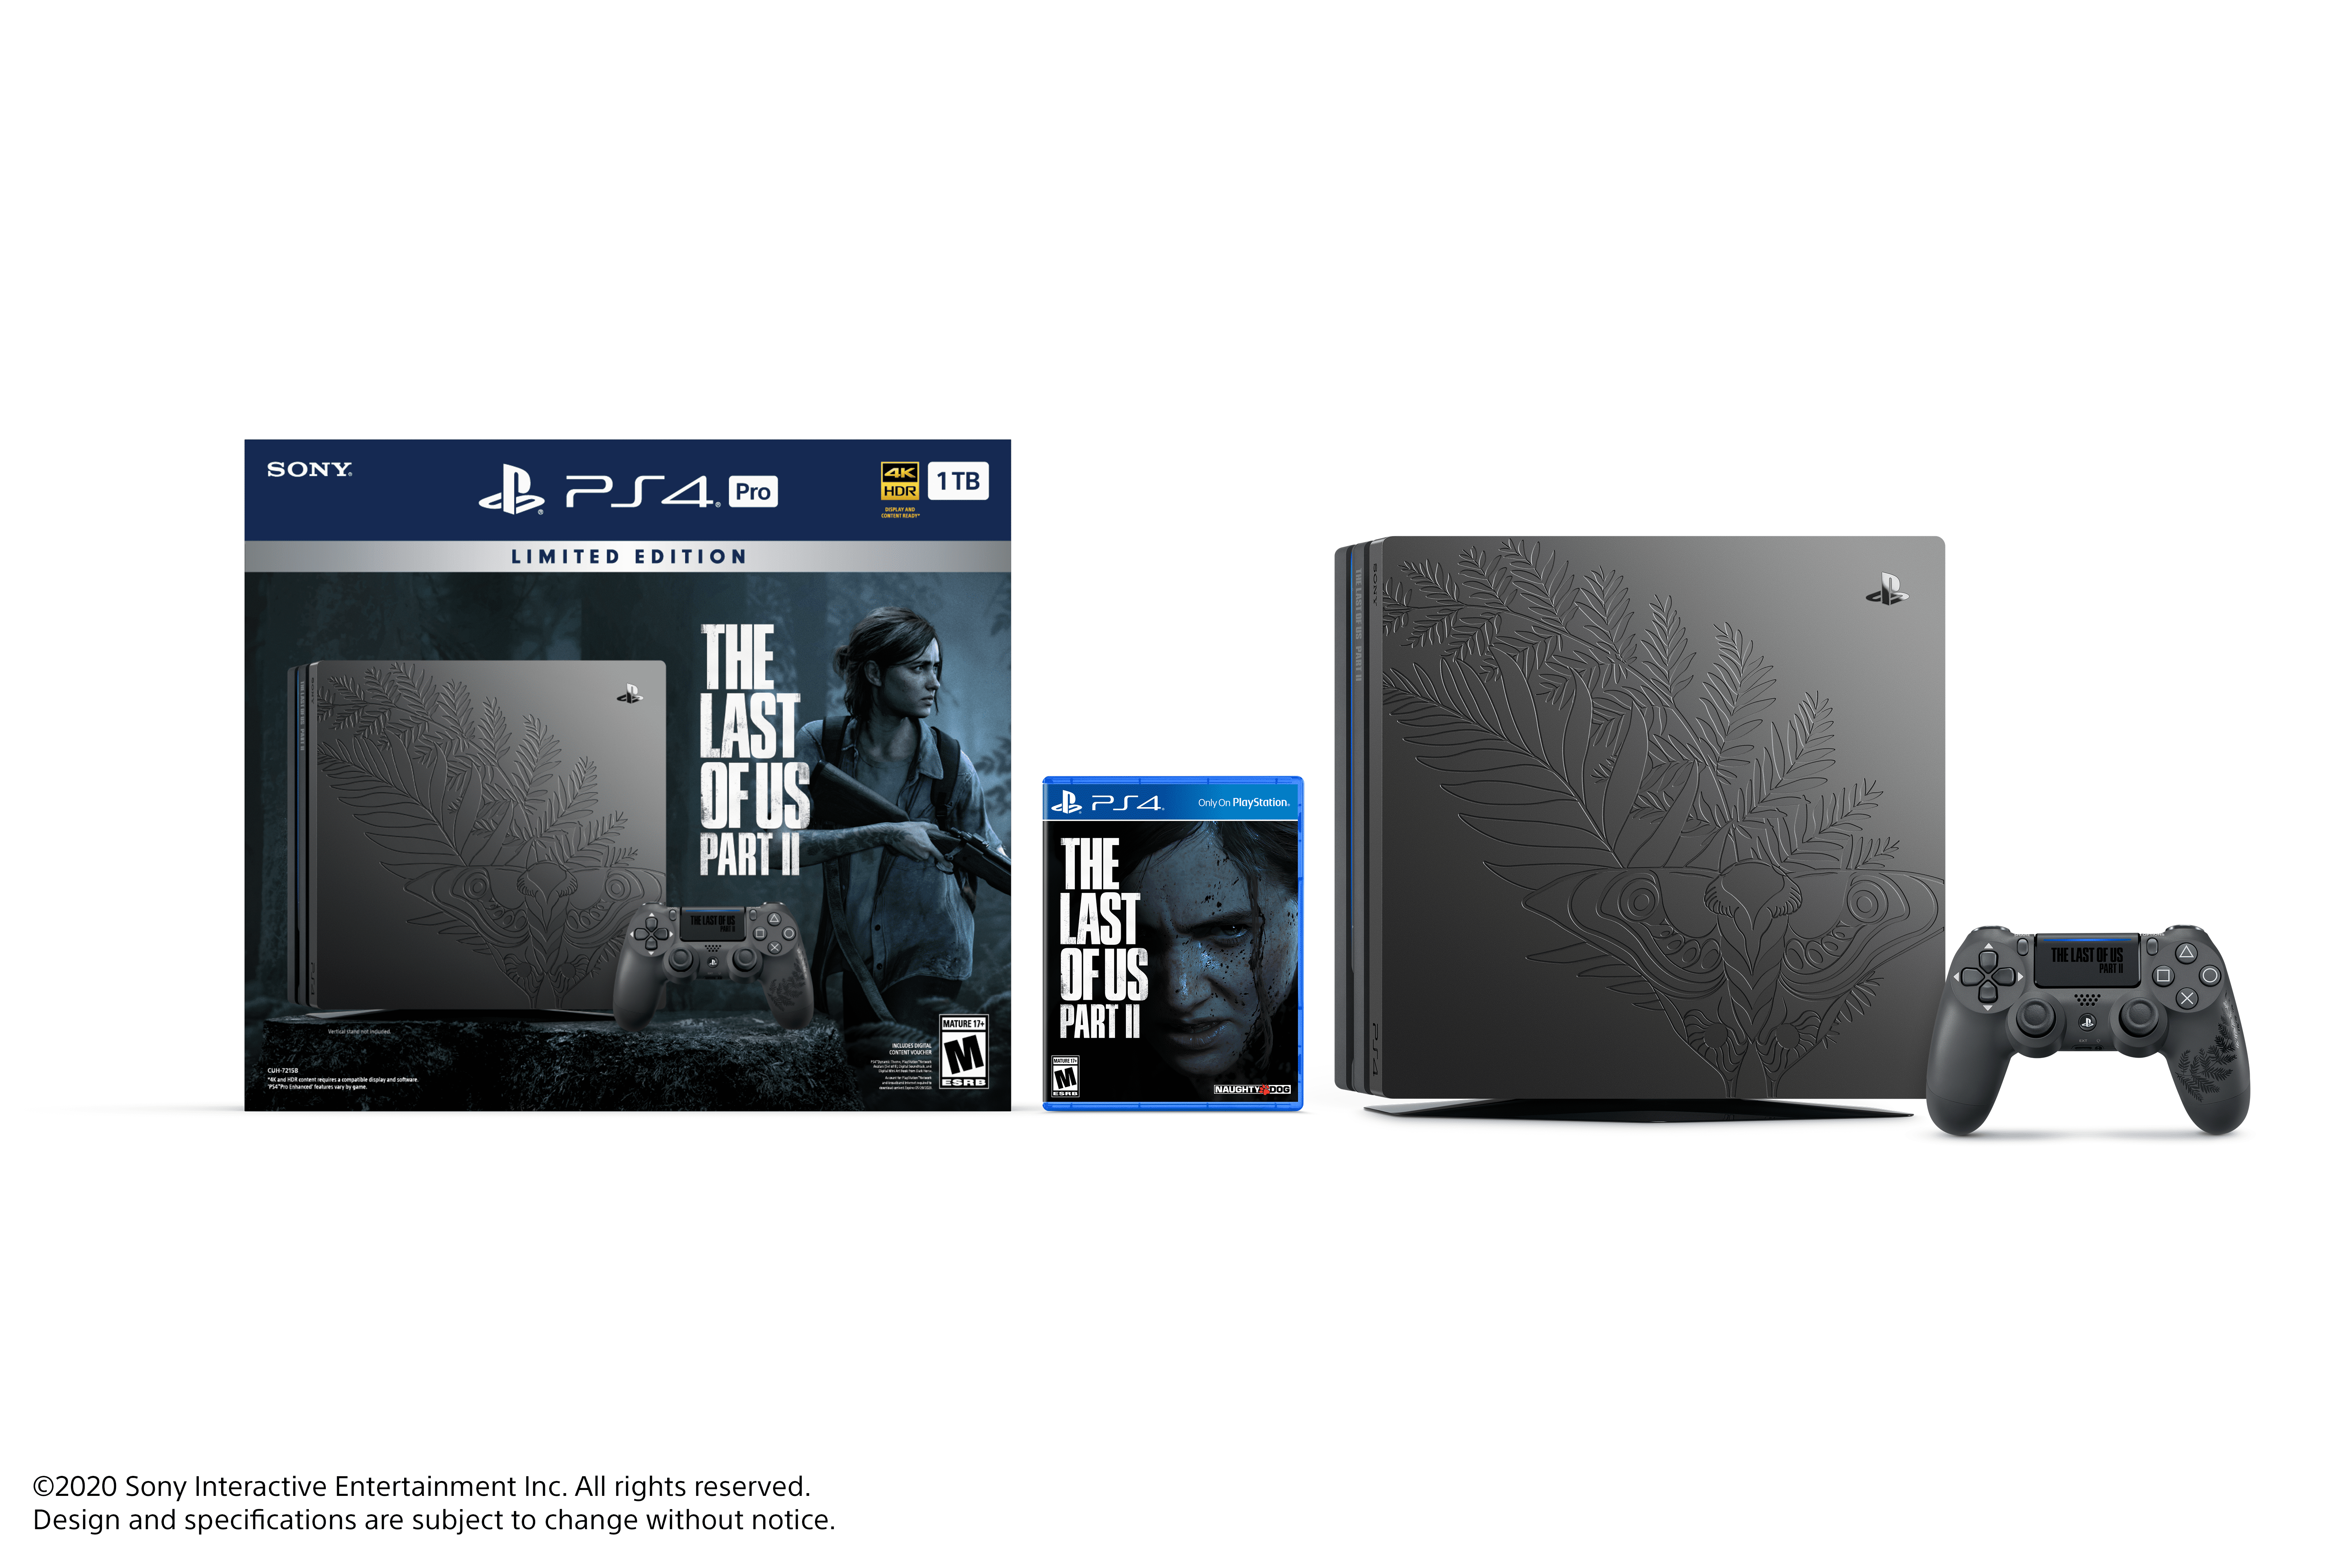  The Last of Us Part II - Standard Edition [PlayStation